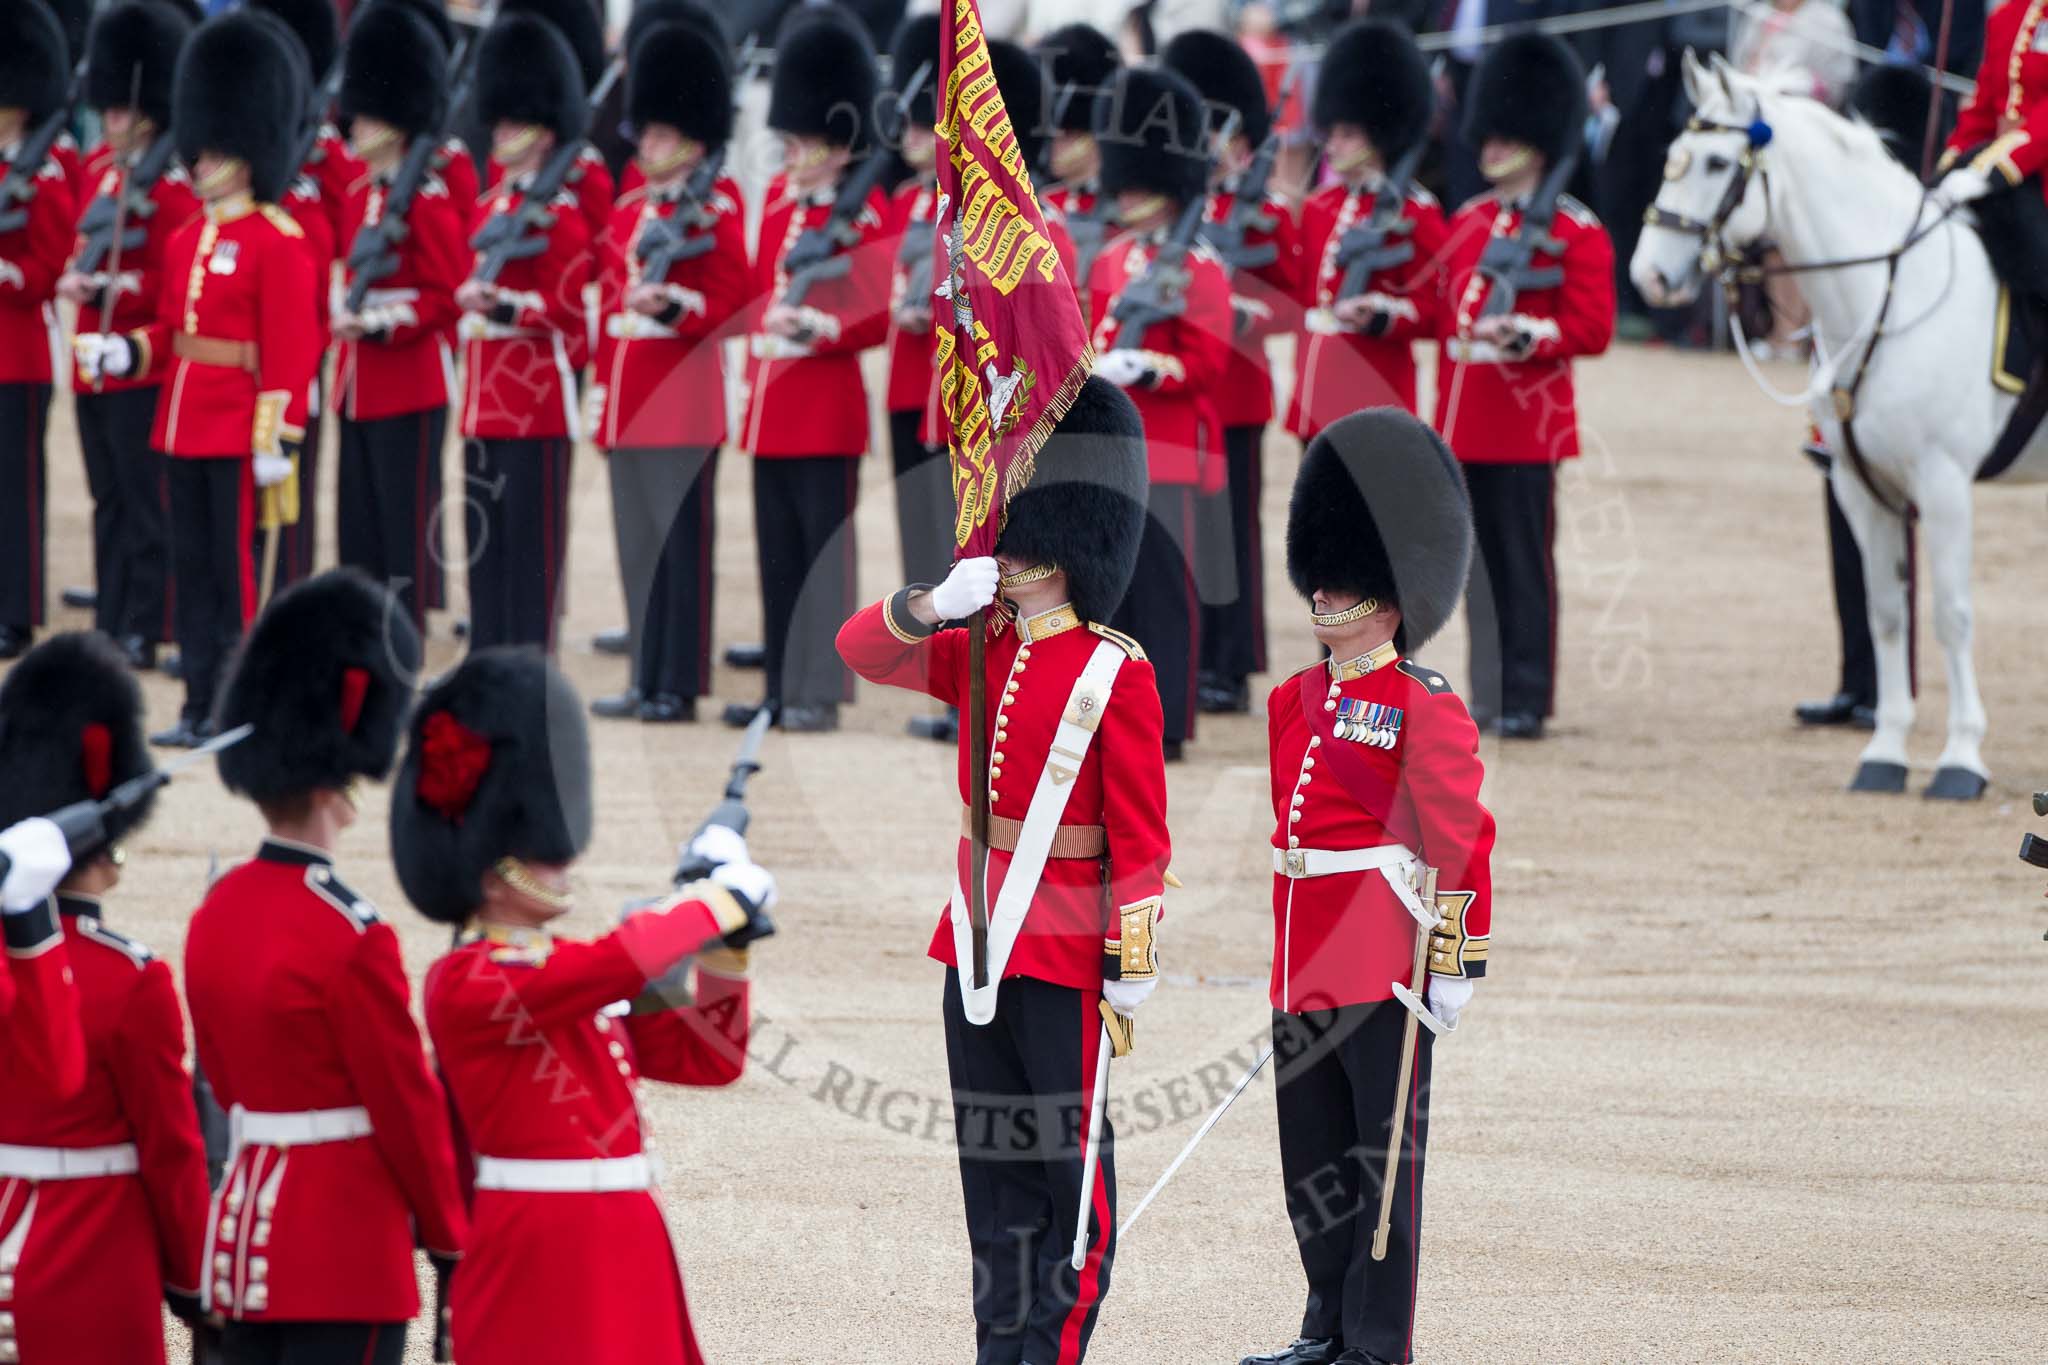 Trooping the Colour 2012: Ensign and Regimental Sergeant Major after the Collection of the Colour..
Horse Guards Parade, Westminster,
London SW1,

United Kingdom,
on 16 June 2012 at 11:22, image #314